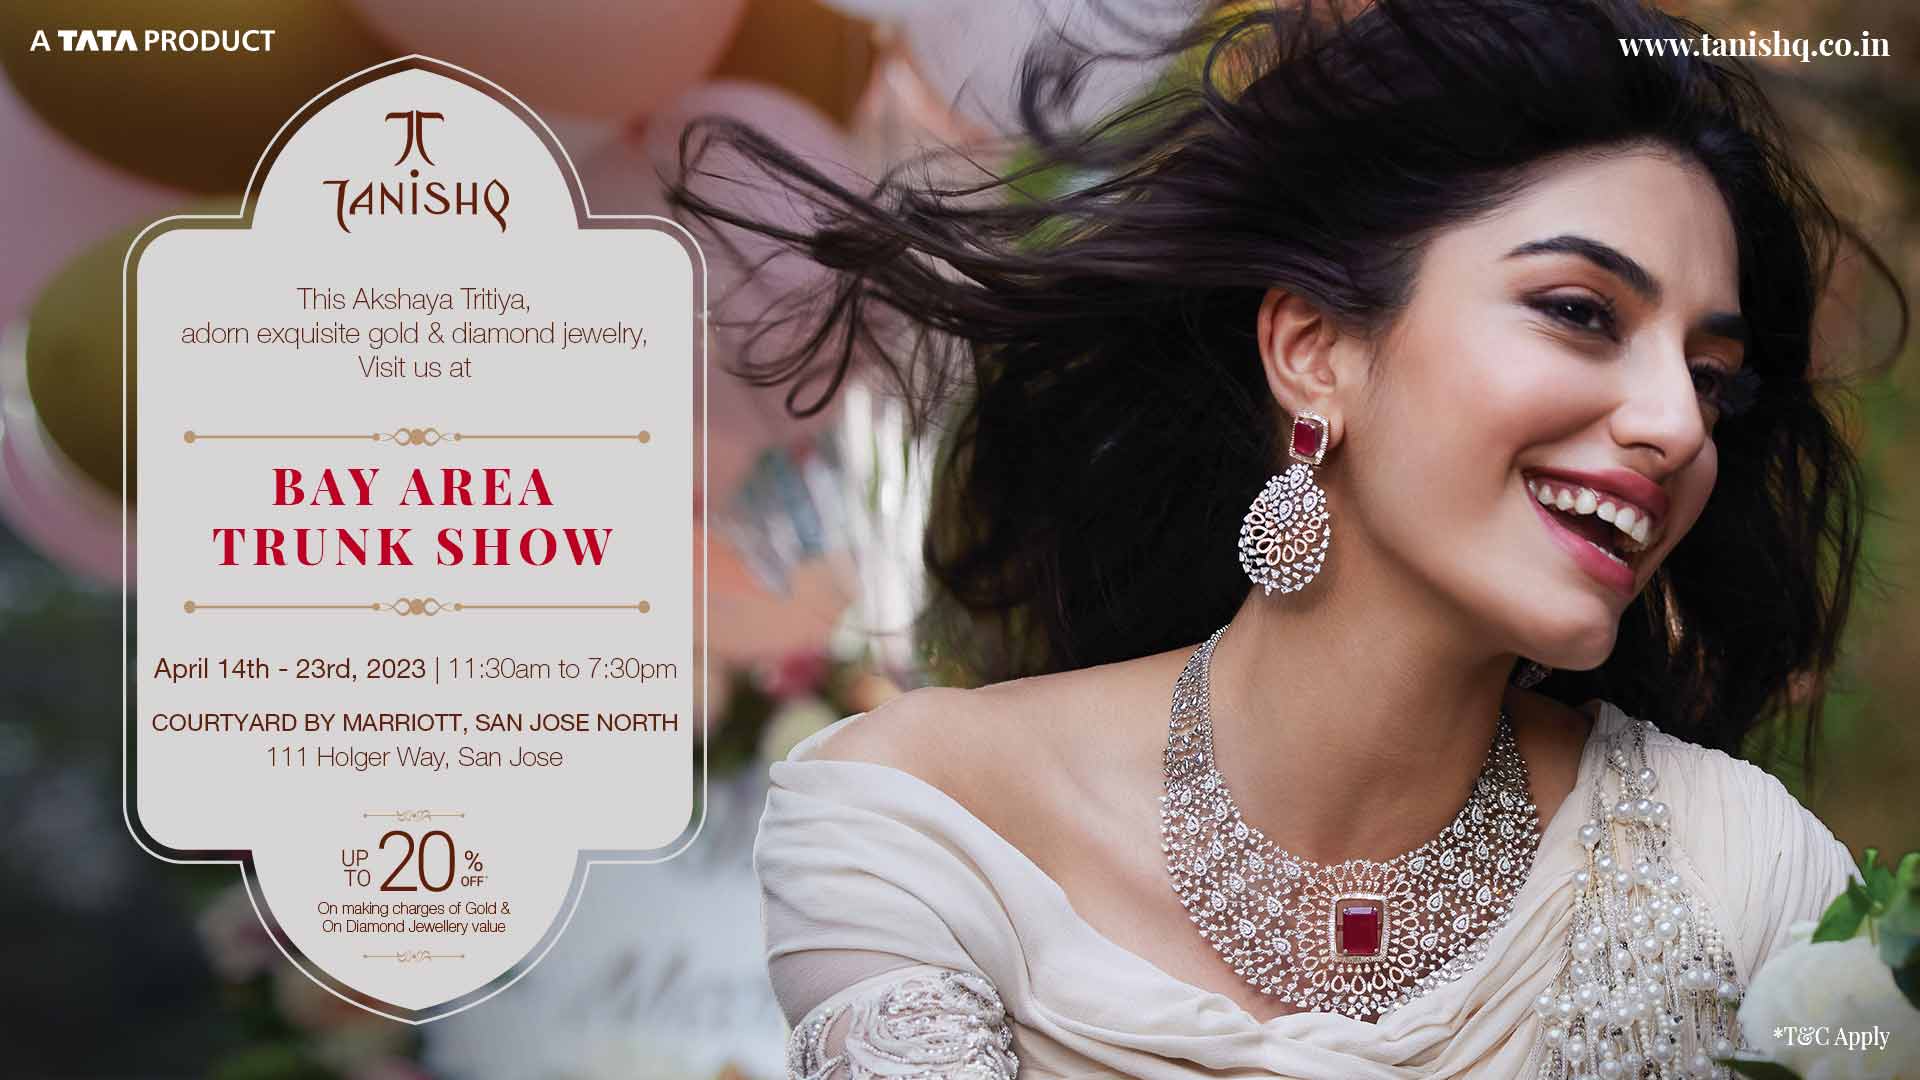 Tanishq Bay Area Trunk Show at Courtyard by Marriott San Jose in San